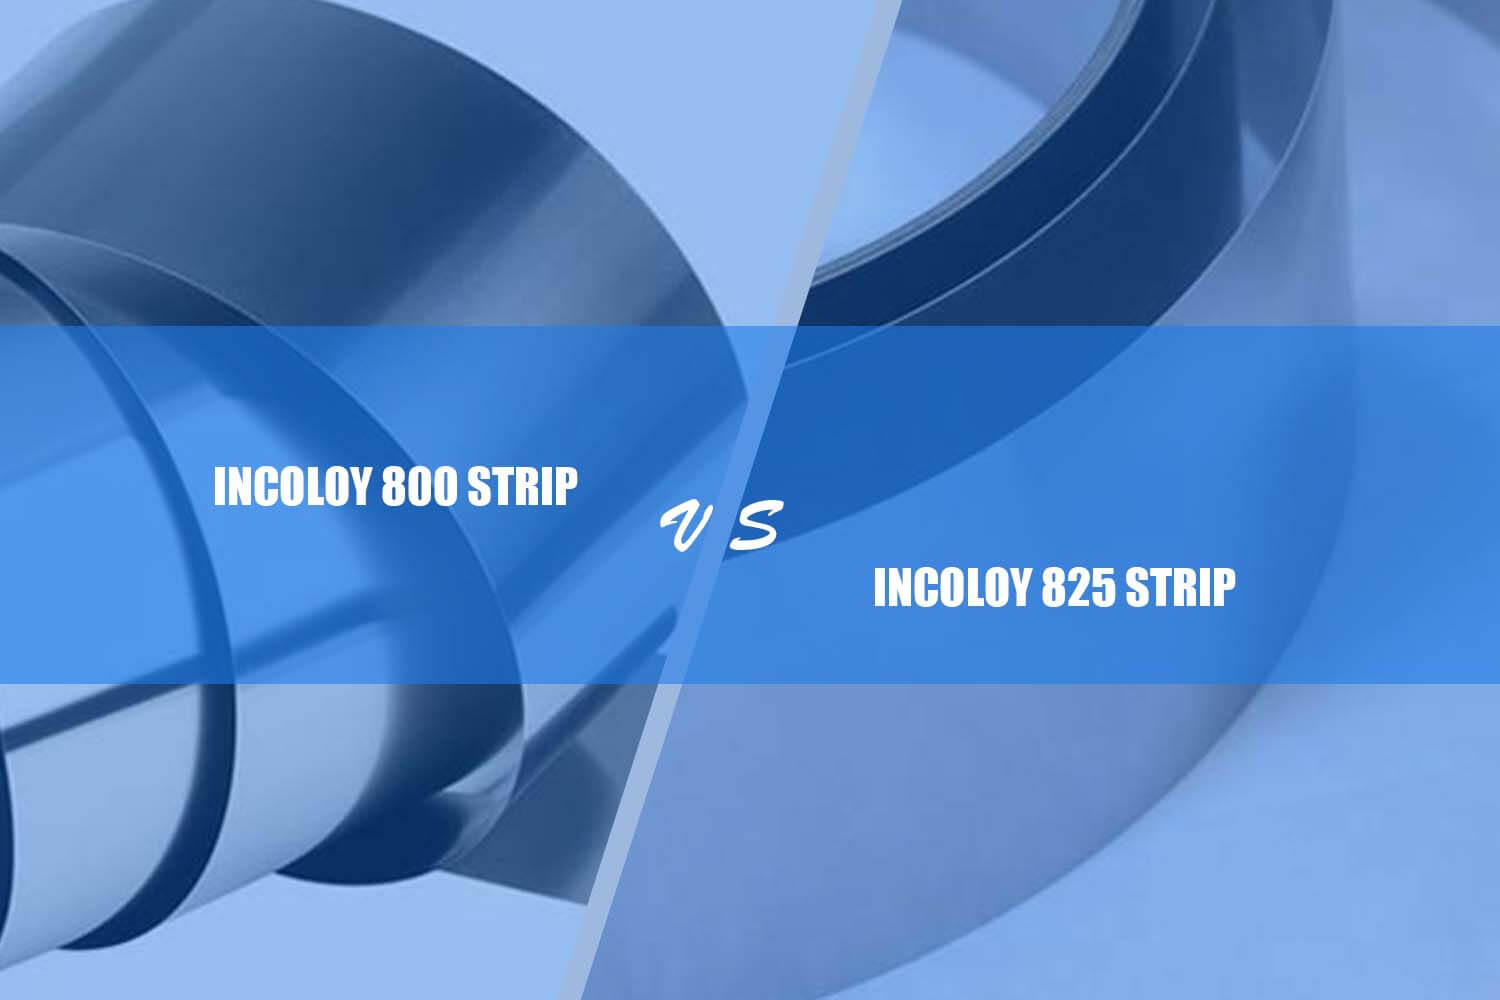 difference between incoloy 800 strip and incoloy 825 條